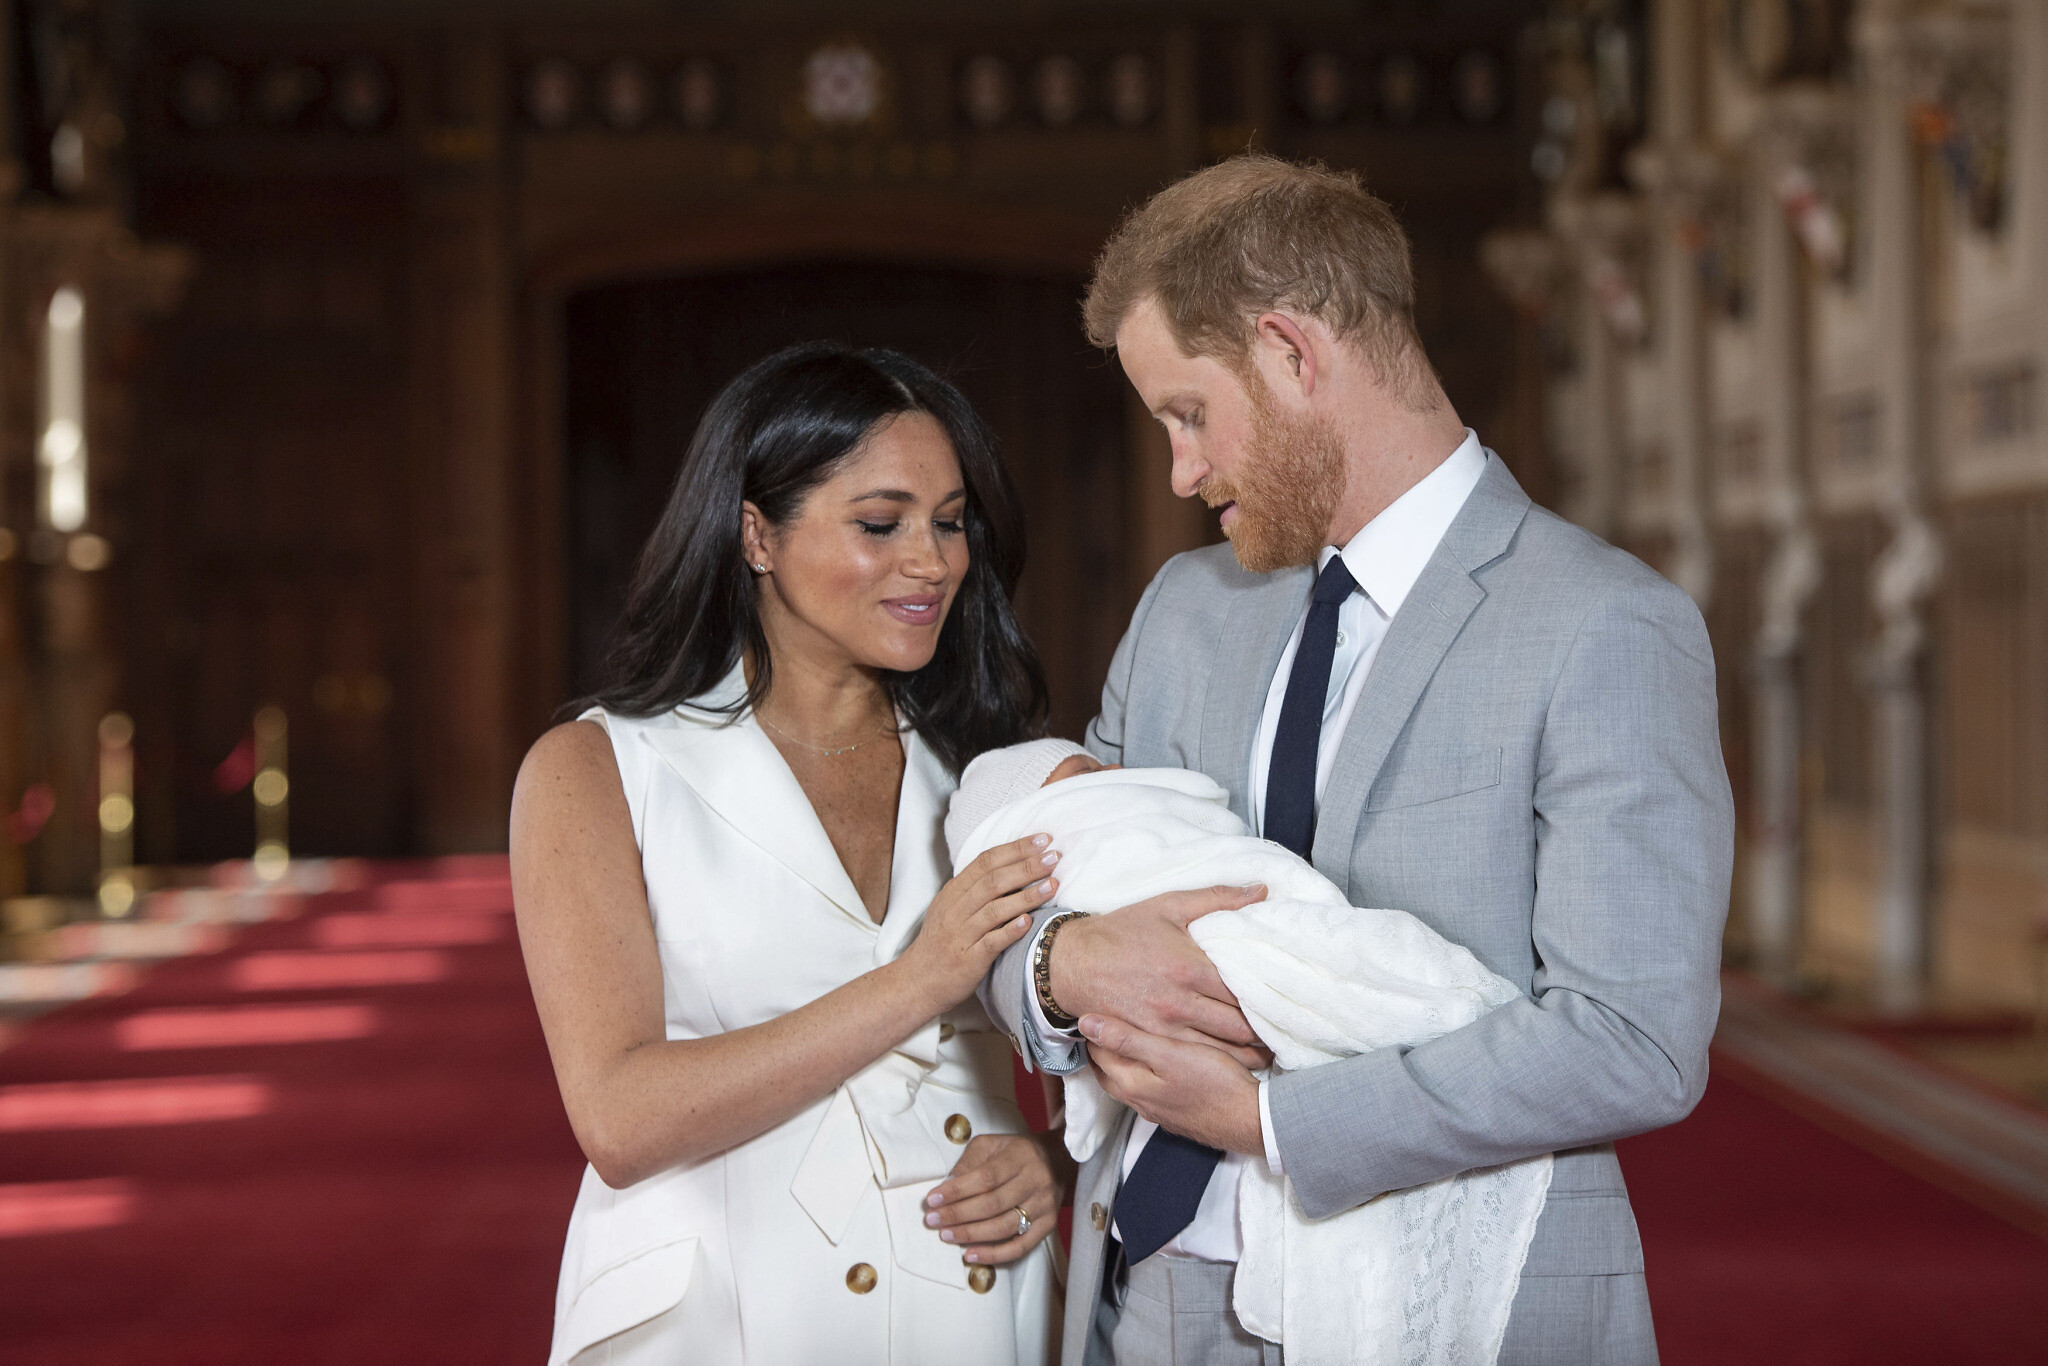 Prince Harry, Meghan Markle expecting second child The Times of Israel